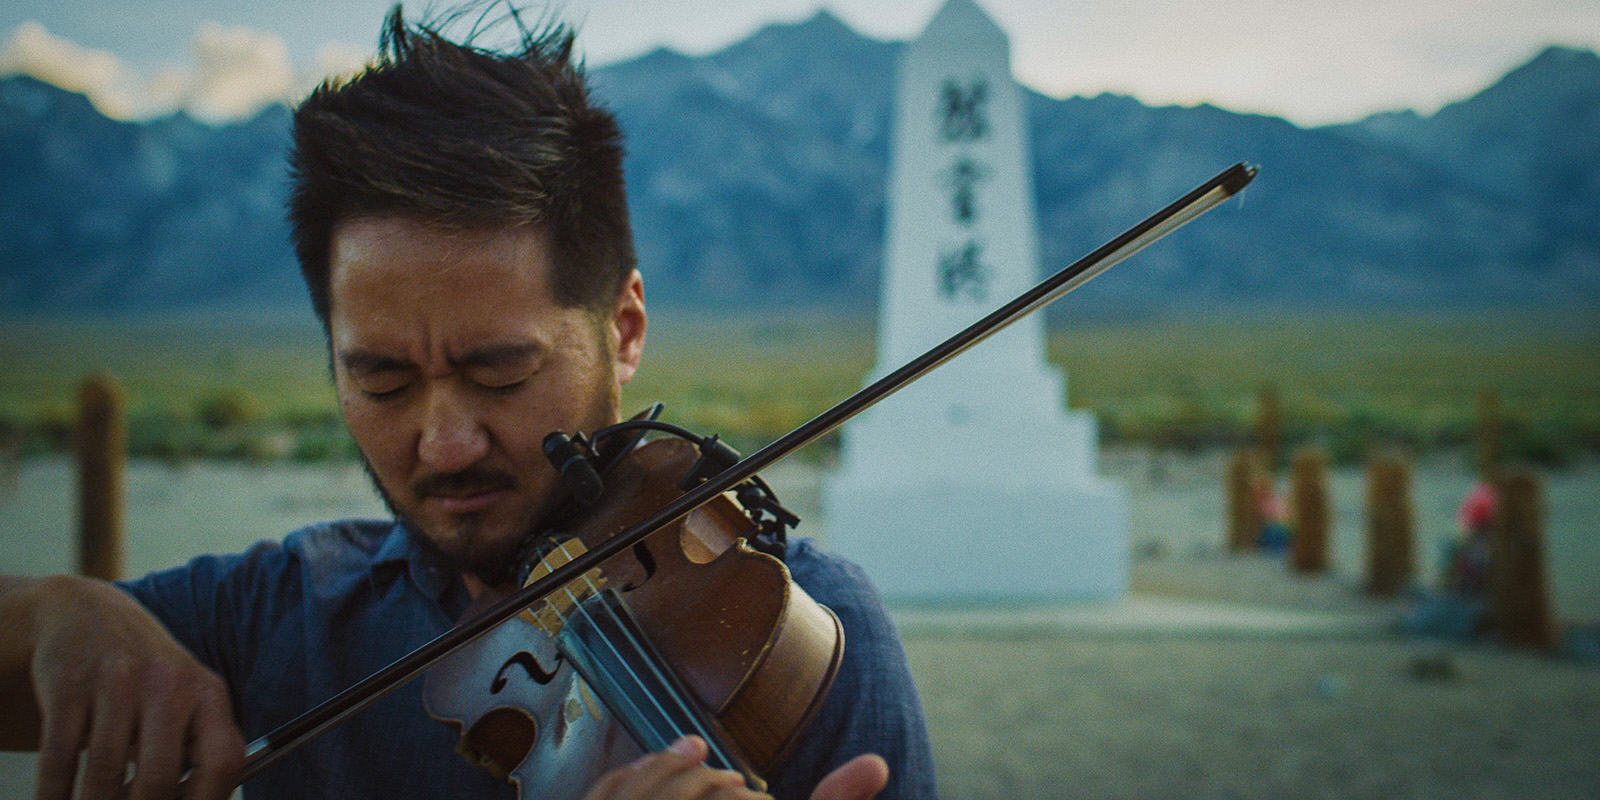 A man plays a violin outside in front of a monument